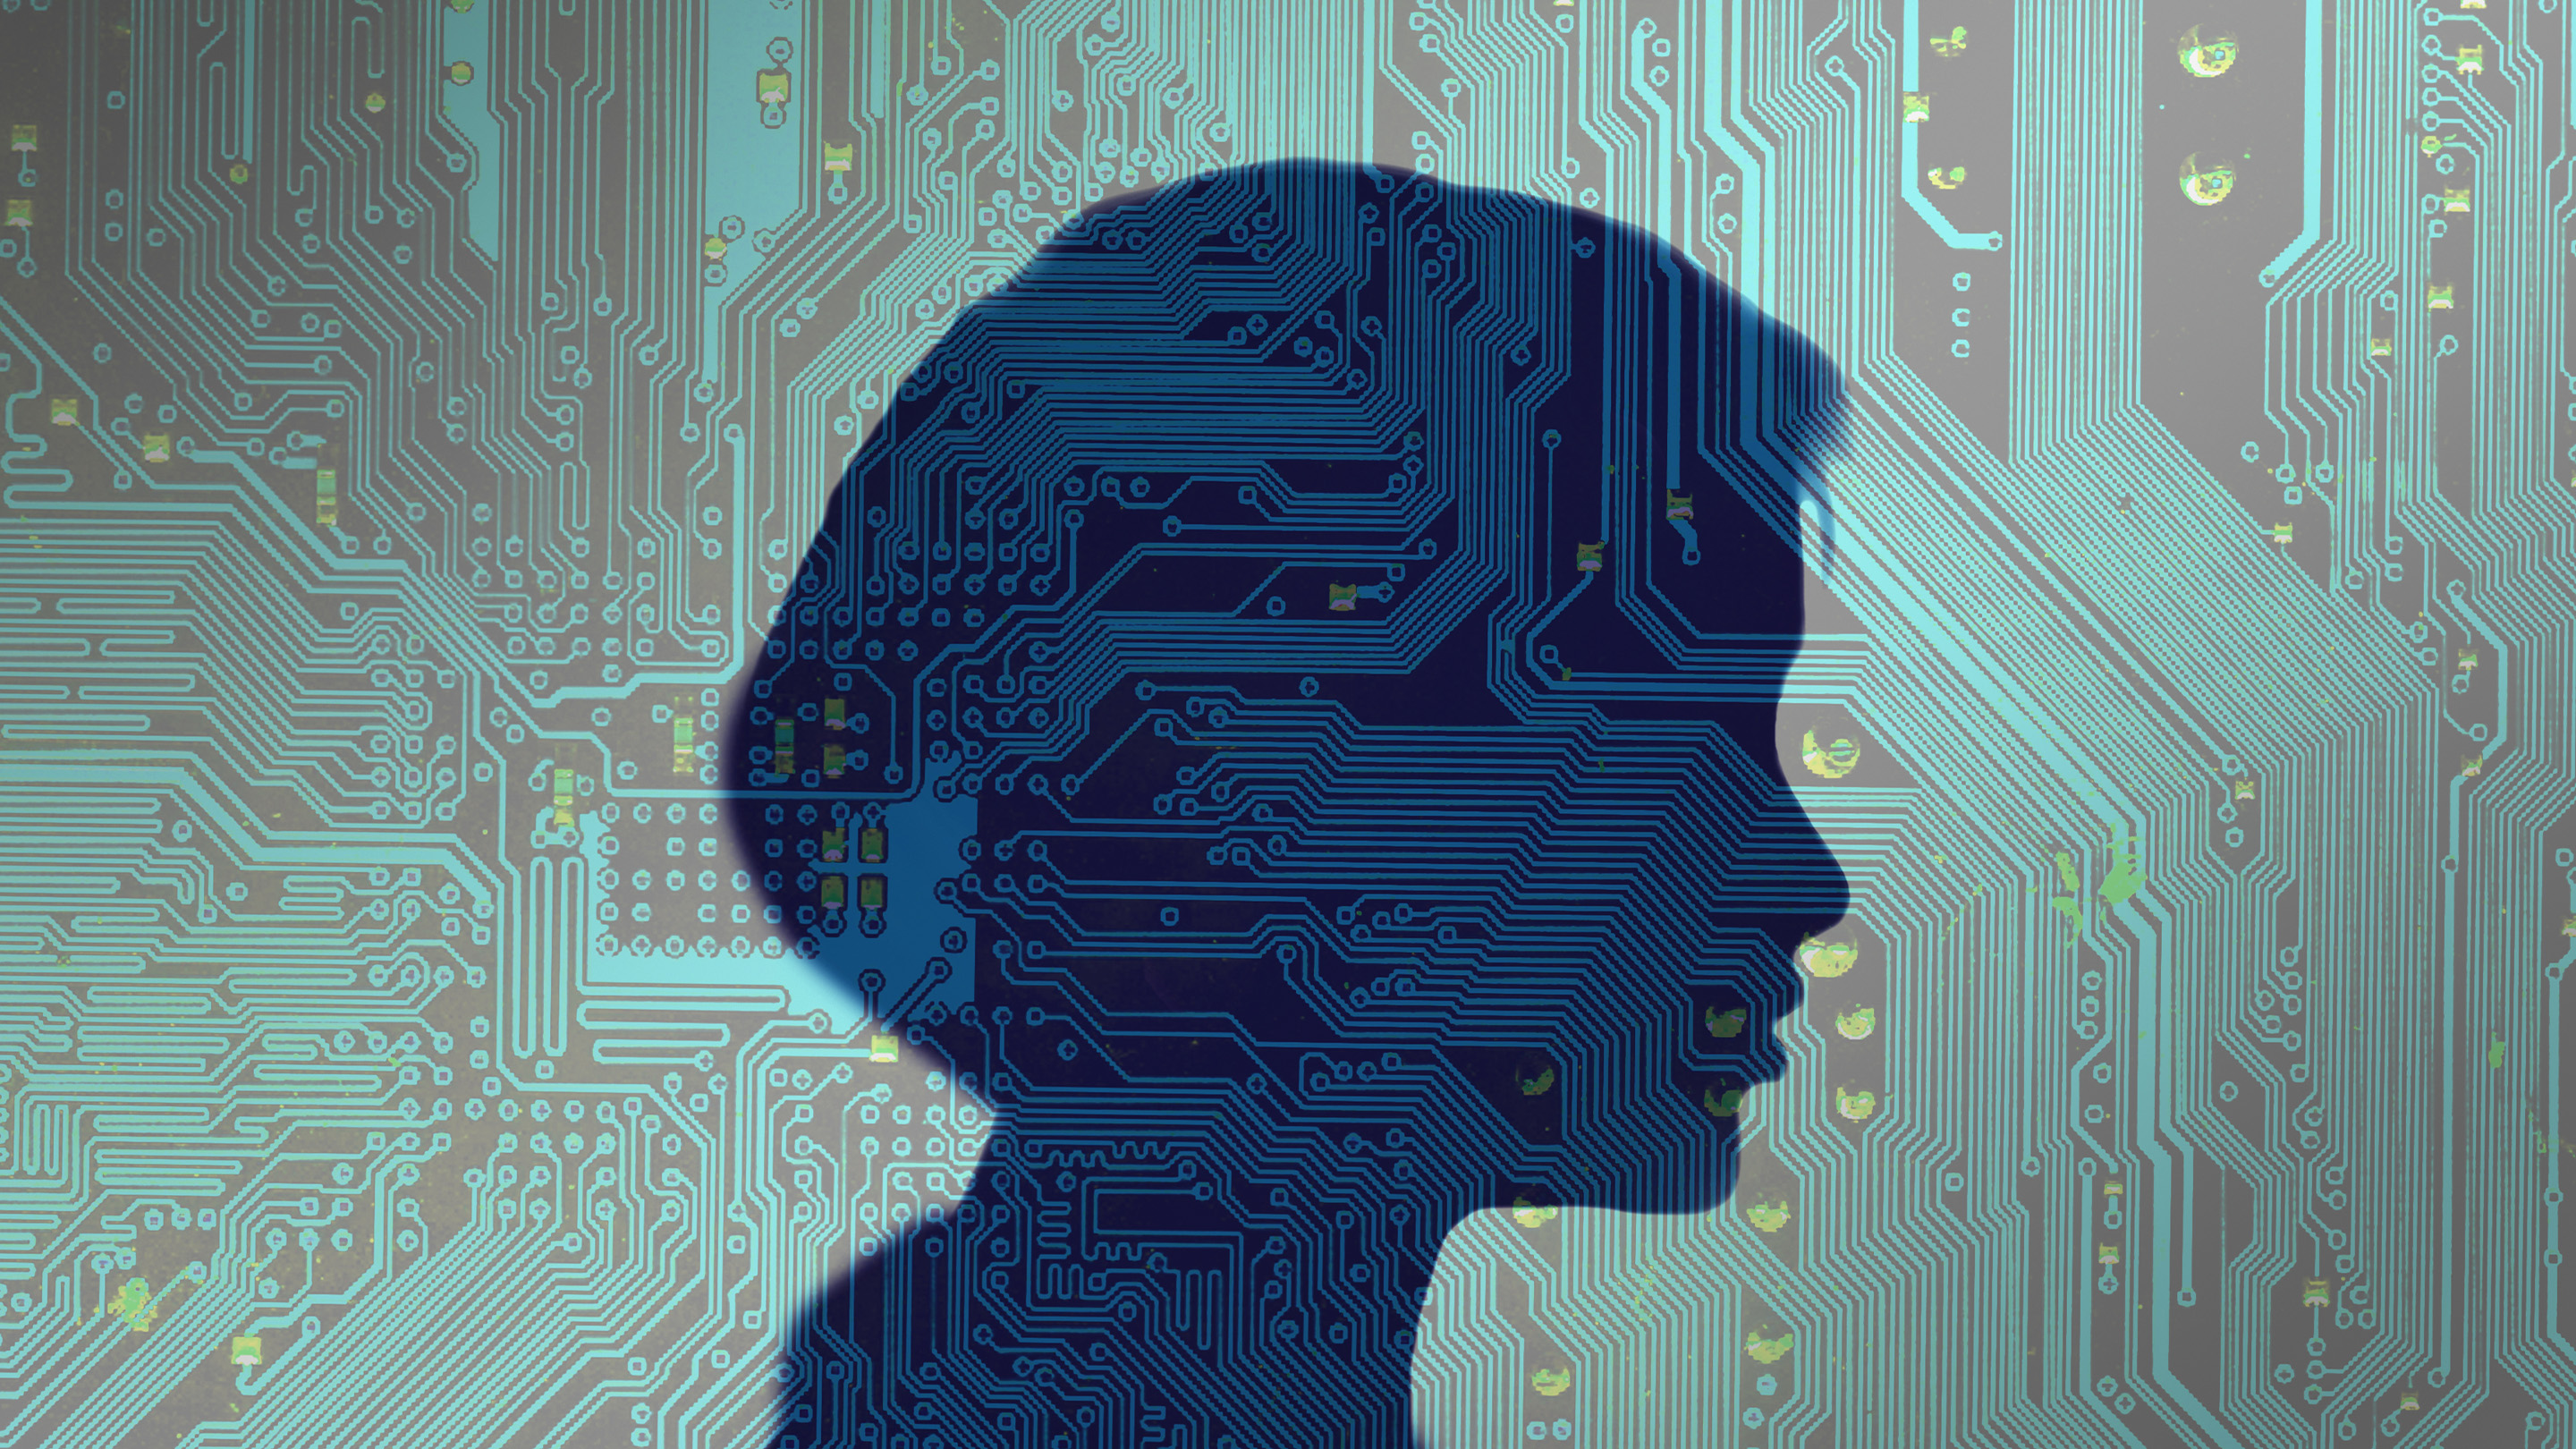 5 Steps to Creating an AI-Ready Learning Environment